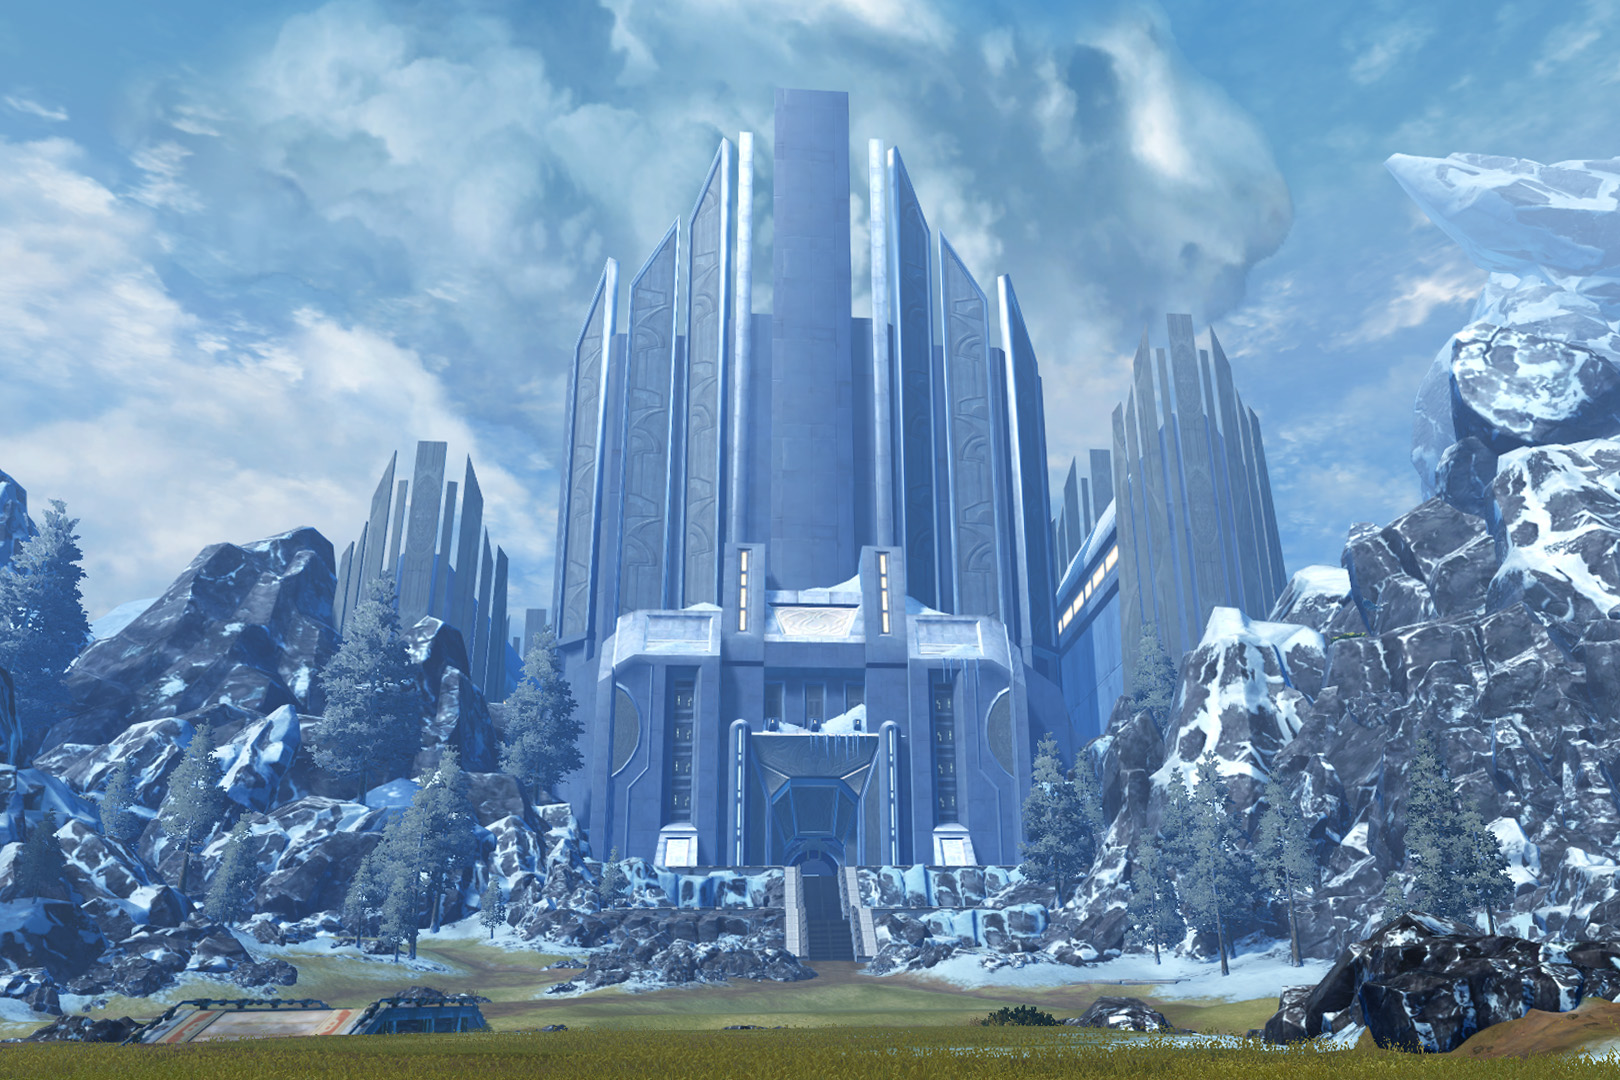 Star Wars: The Old Republic - Alderaan Stronghold